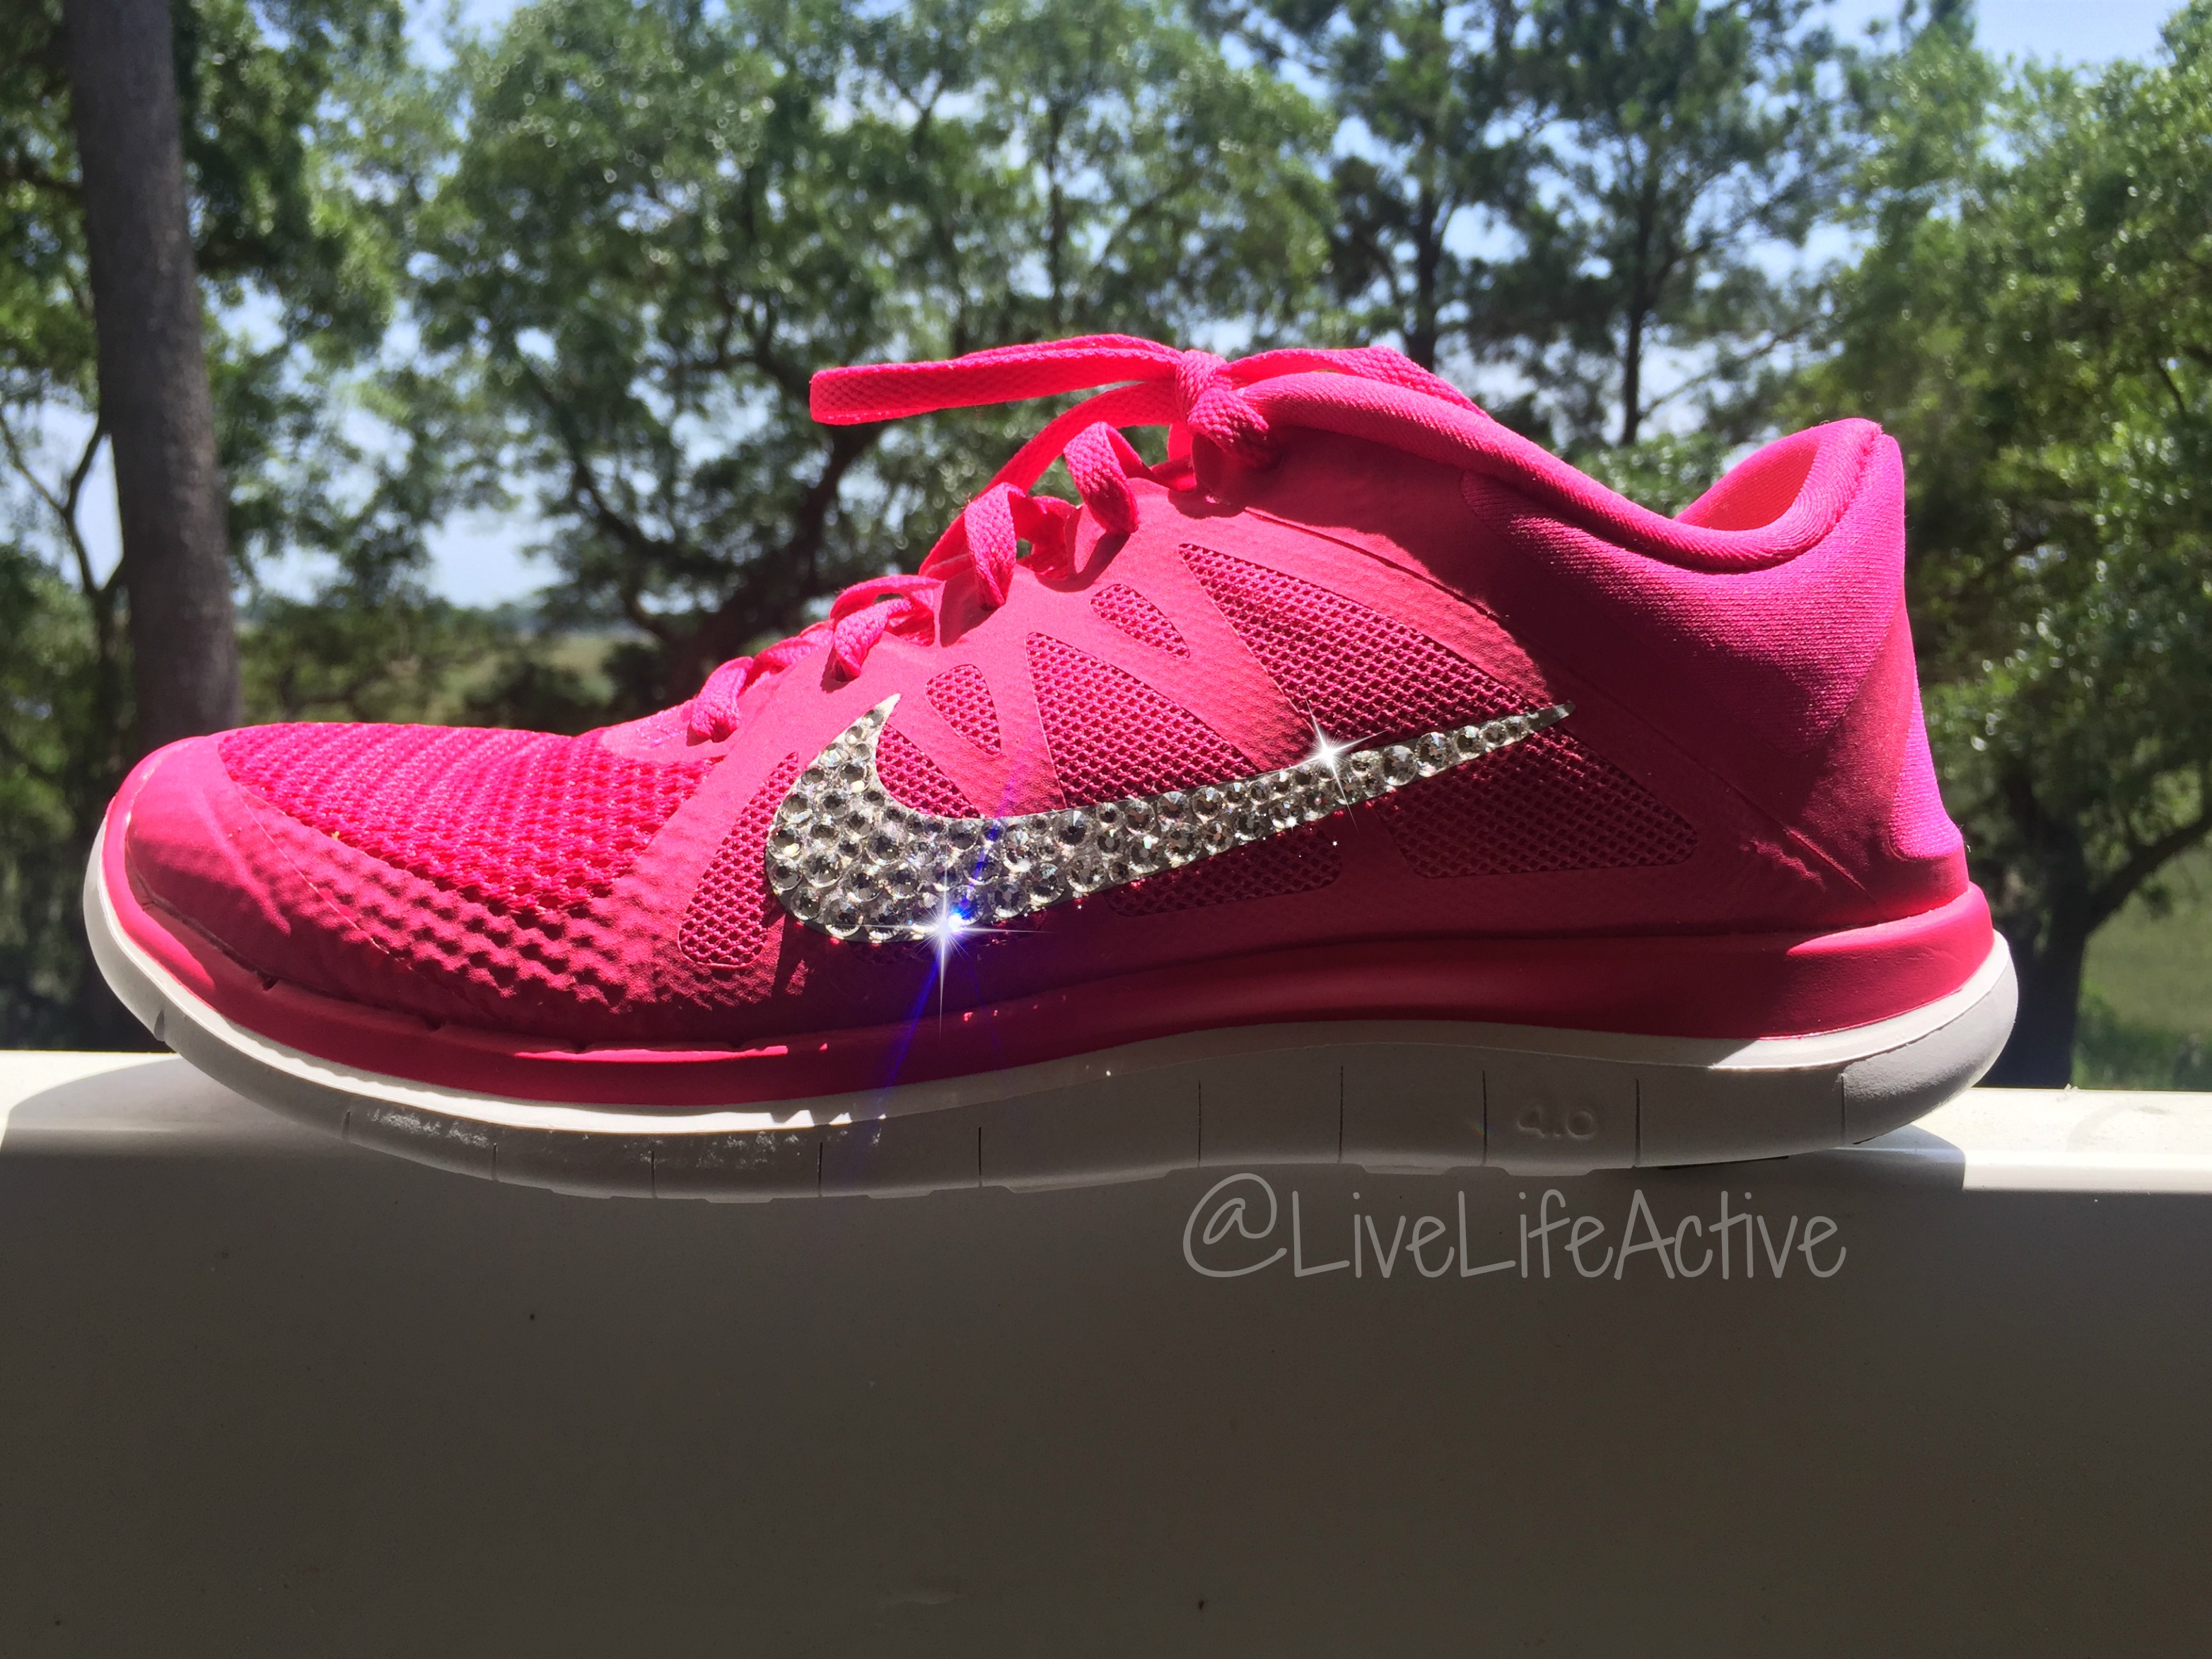 Pink Bedazzled Nike Shoes - Loving love 